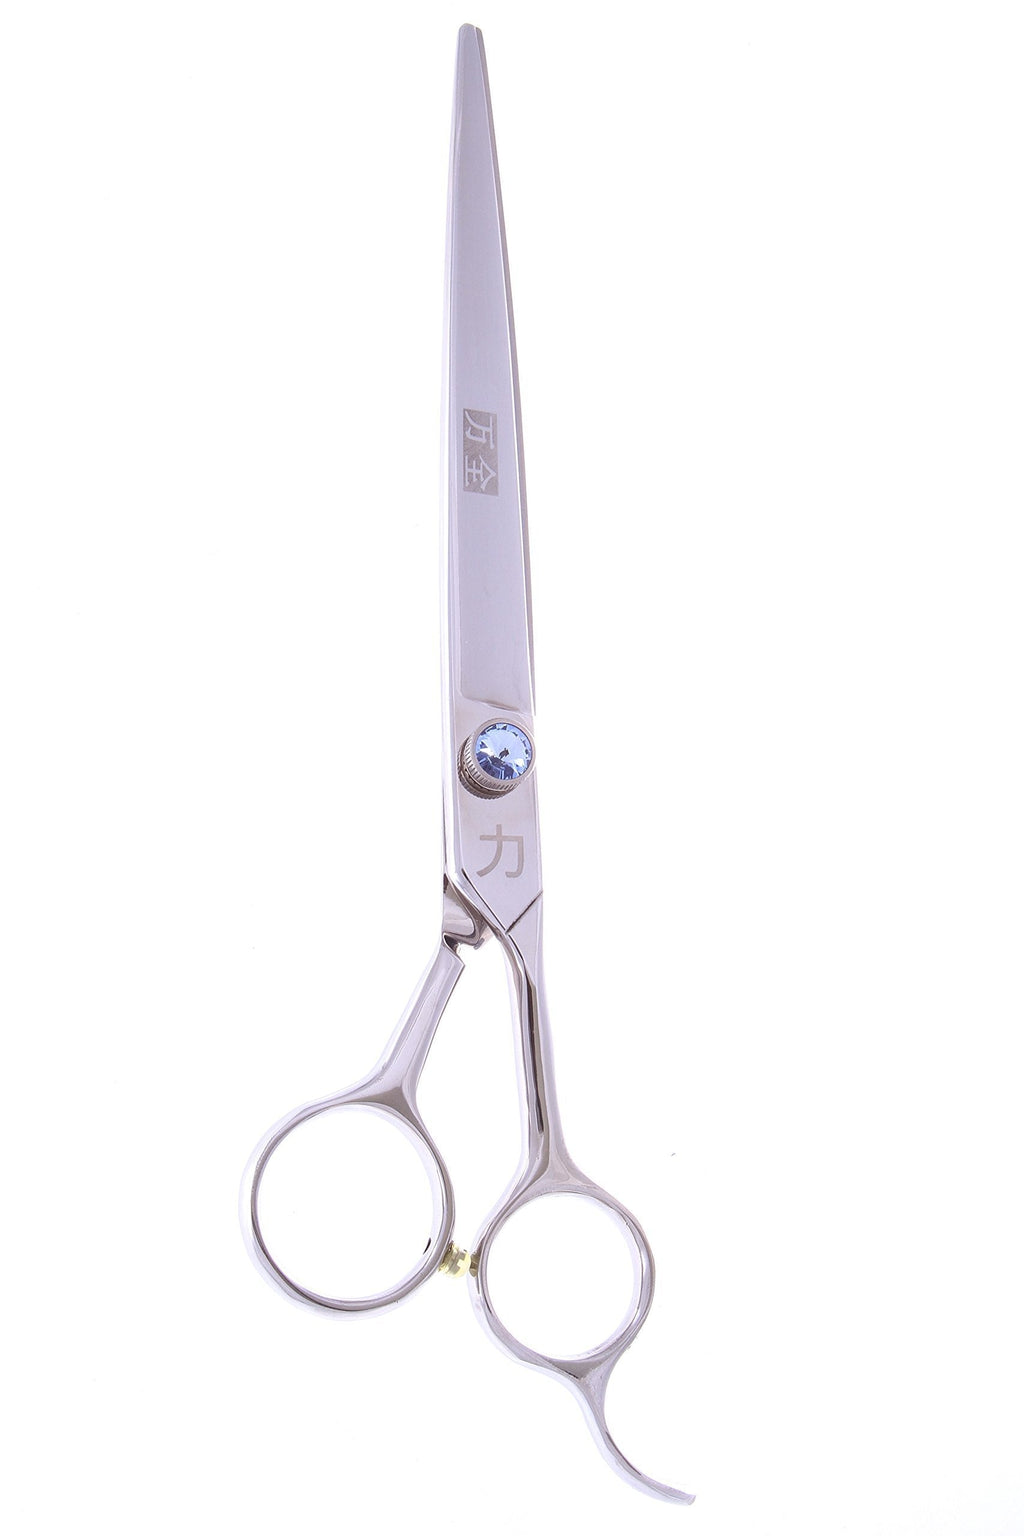 [Australia] - ShearsDirect Japanese 440C Off Set Cutting Shears with Light Blue Gem Stone Tension, 8.0-Inch 